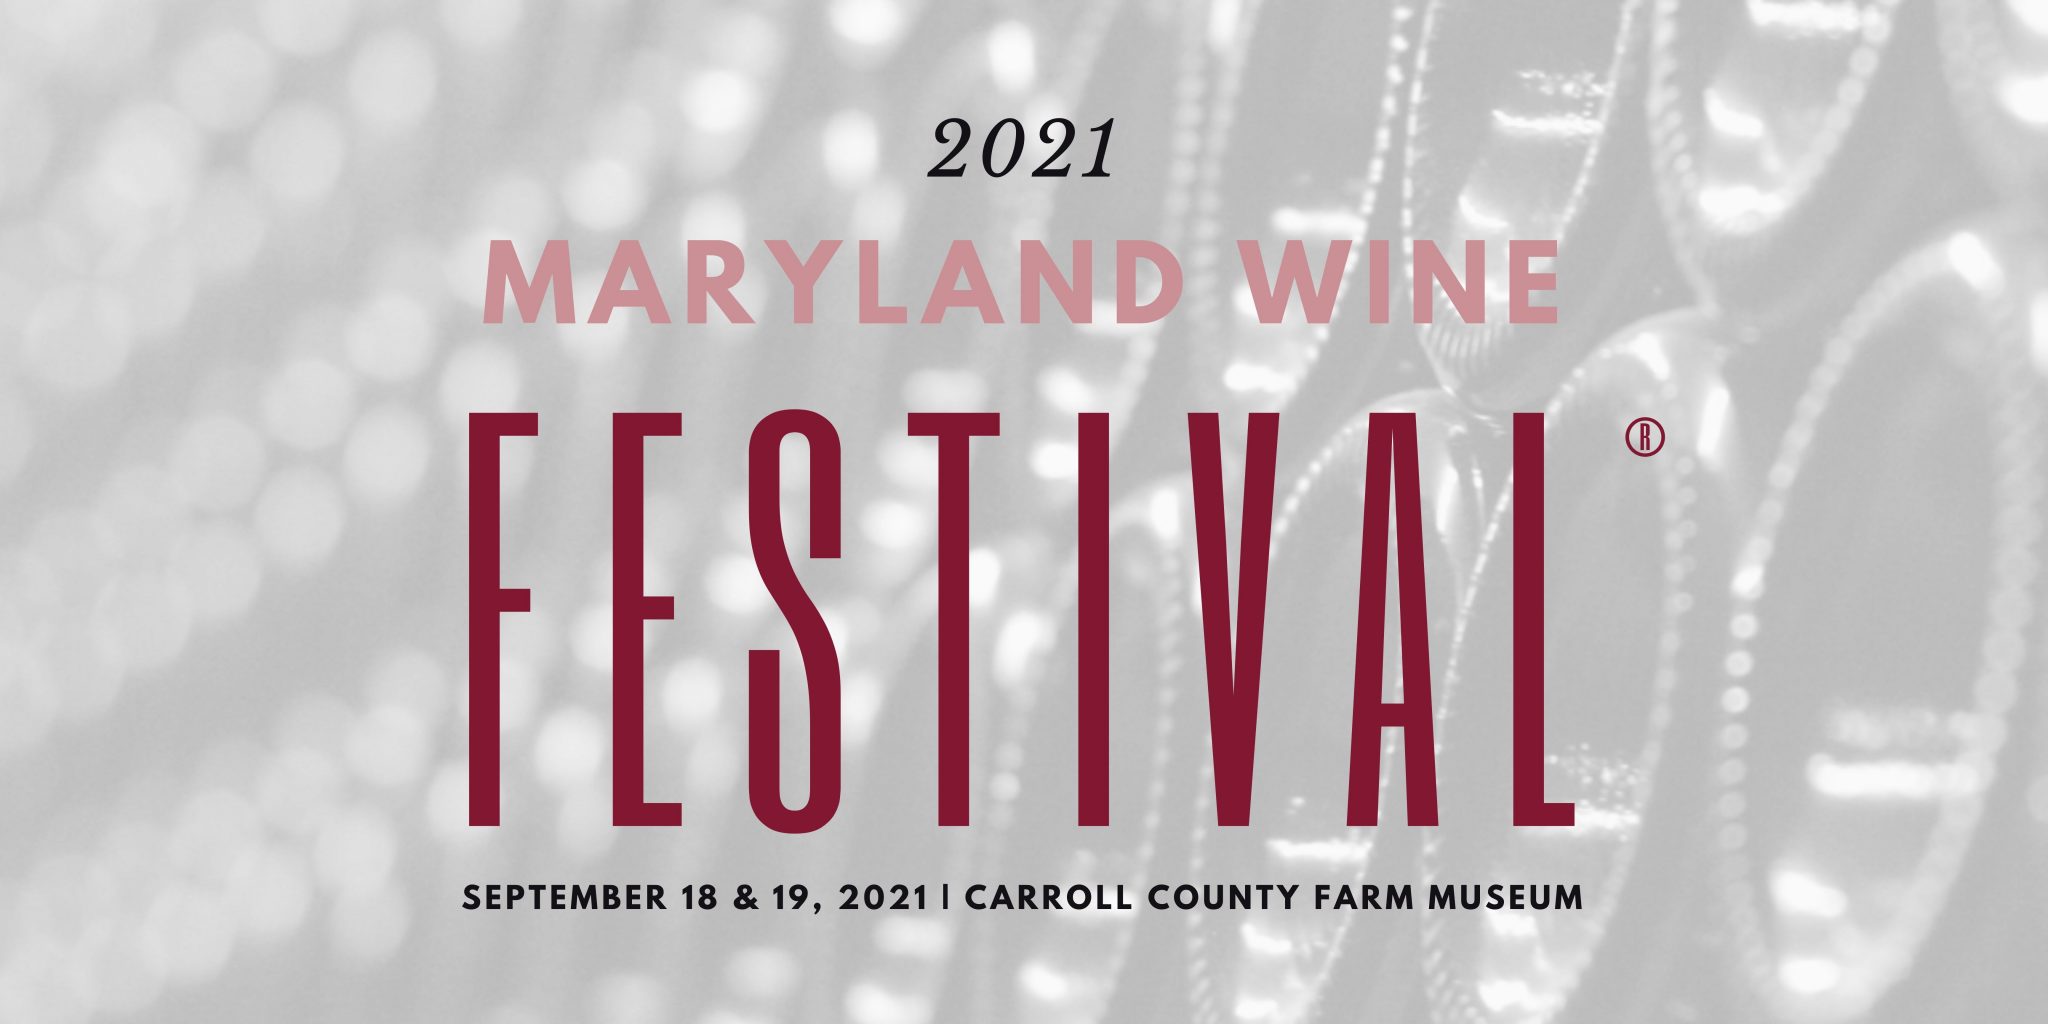 New Layout and Features Coming to 37th Maryland Wine Festival